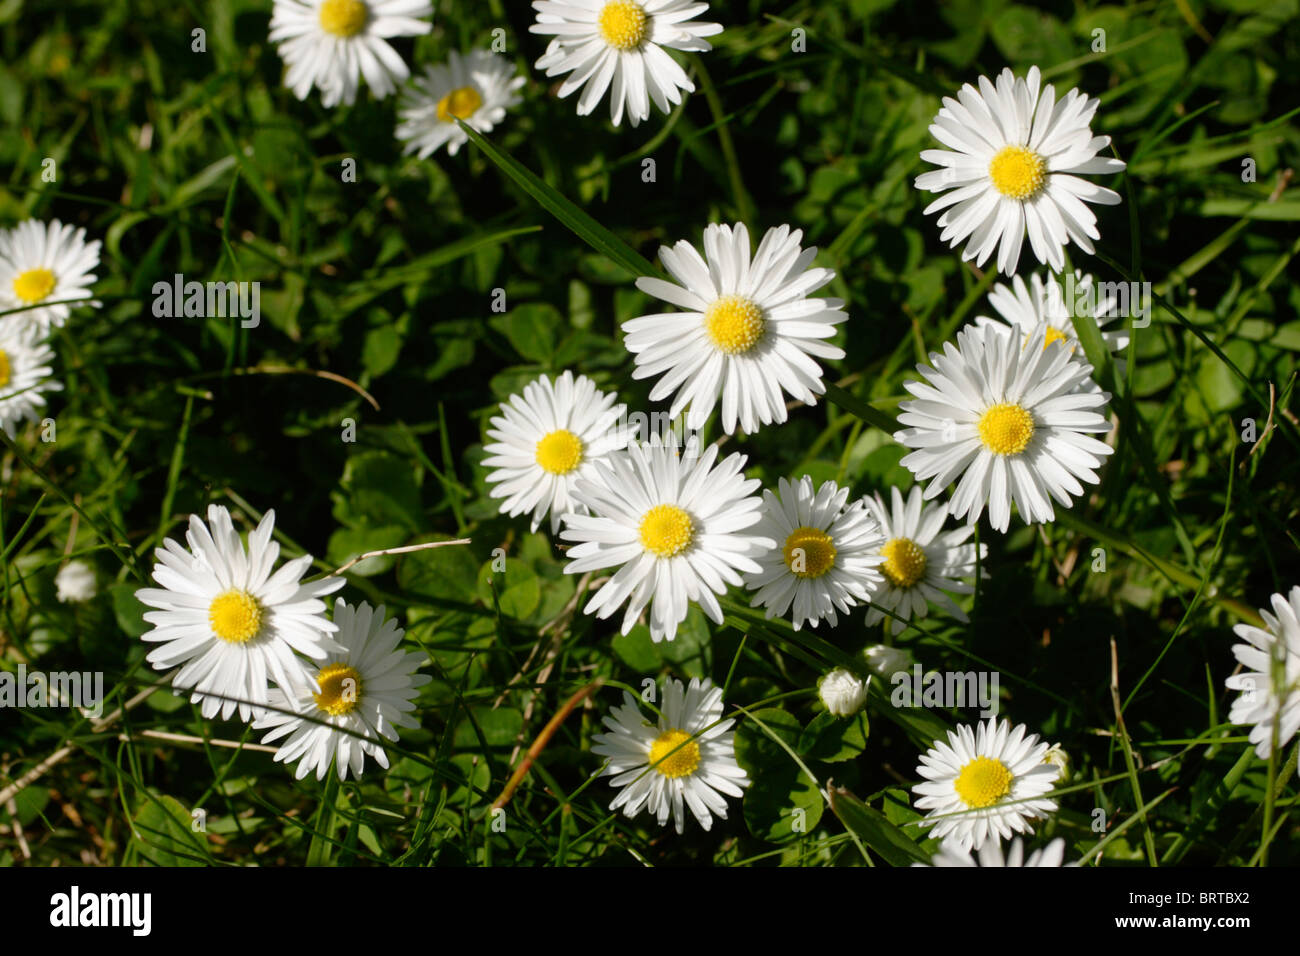 Daisies in lawn Stock Photo